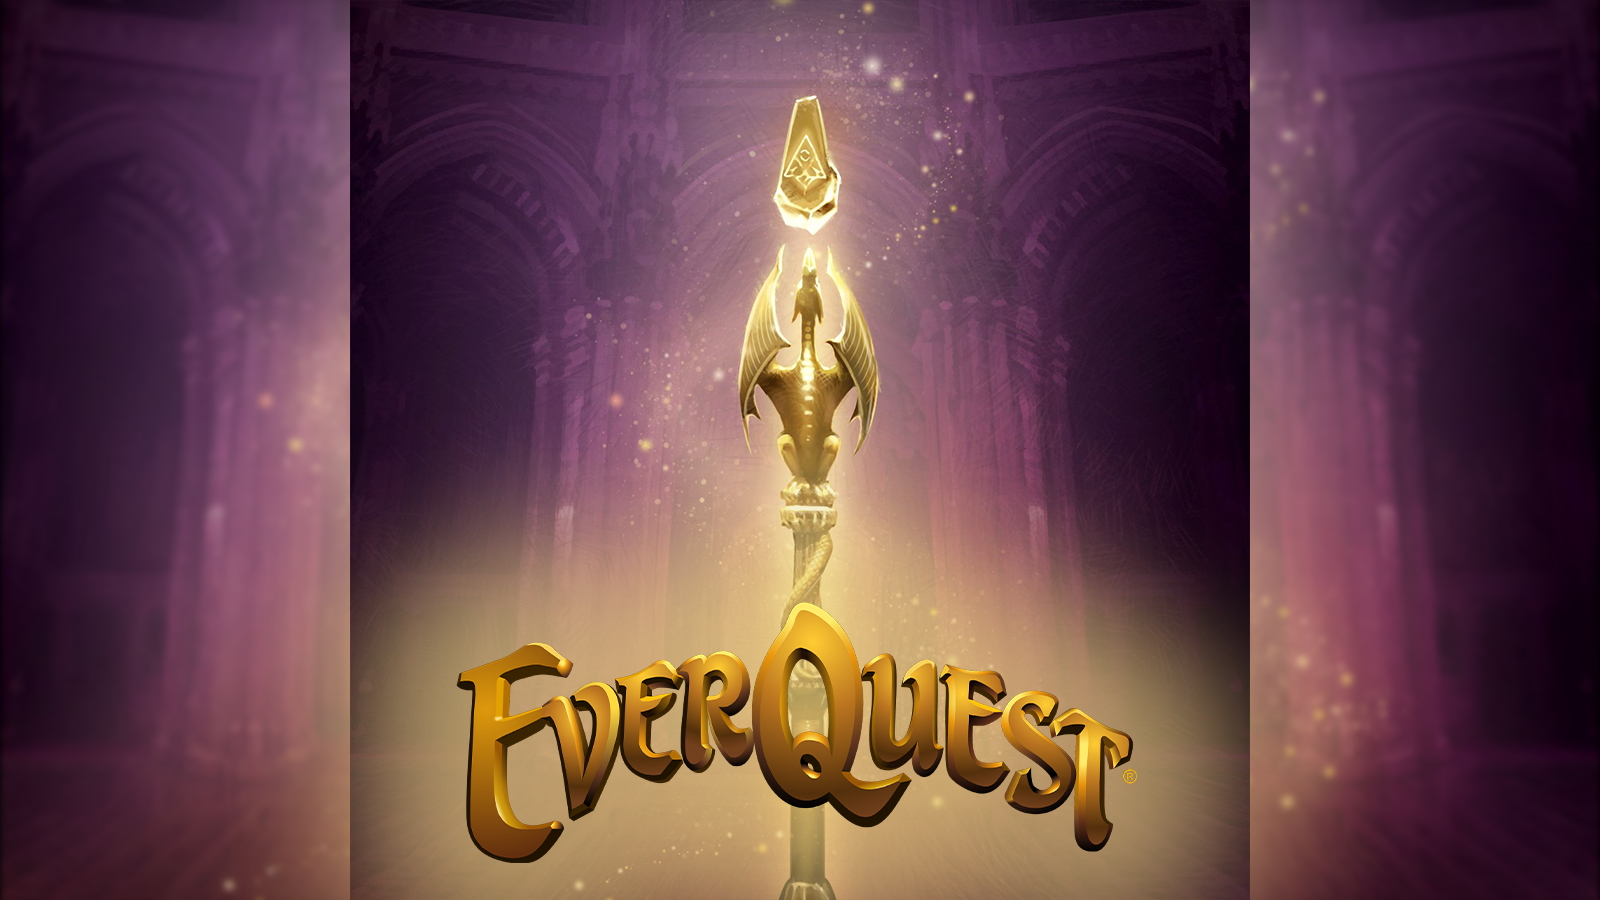 Everquest Is Taking Applications to Its Relaunched Community Council 10